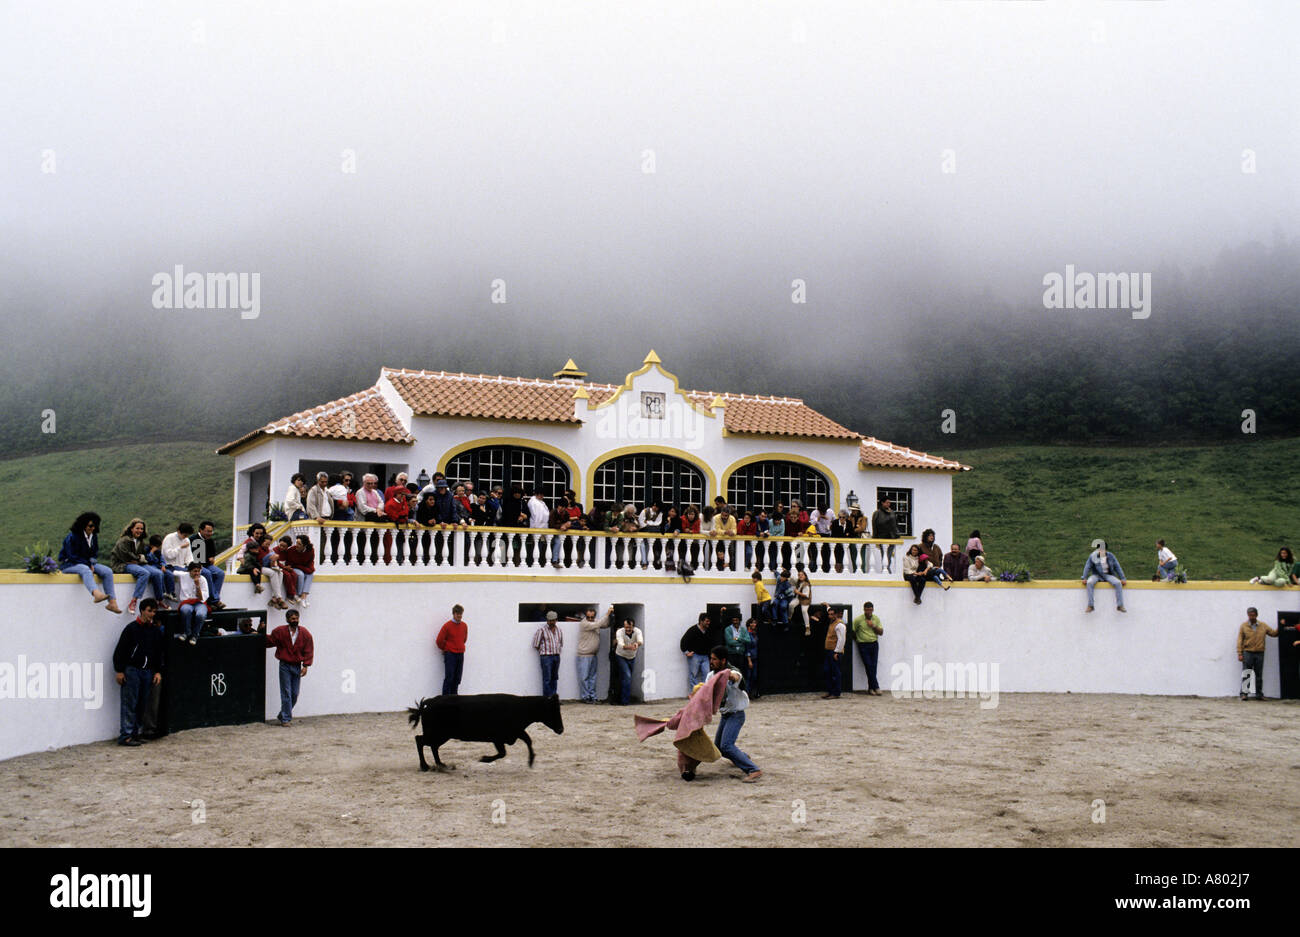 Portugal, the Azores, Terceira Island, bullfight in a private arena Stock Photo